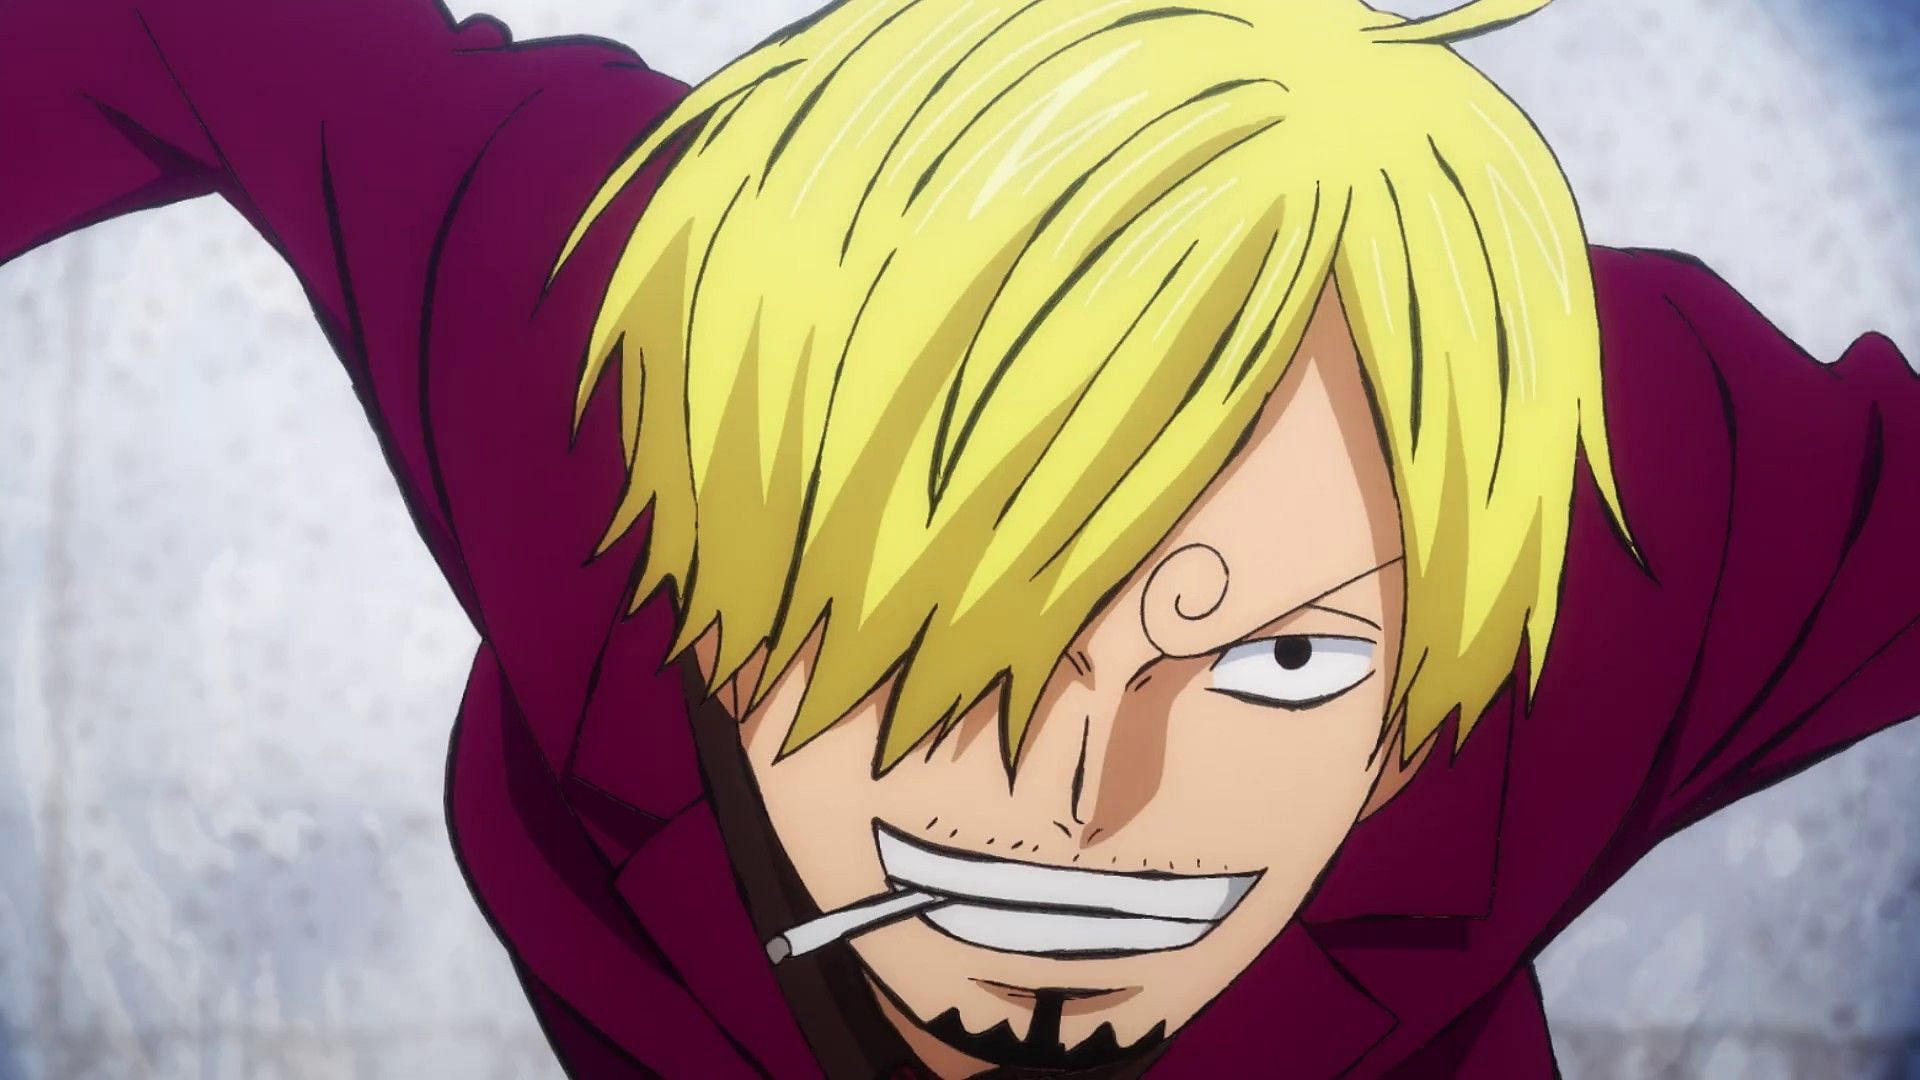 Sanji as seen in the show (Image via Toei Animation)